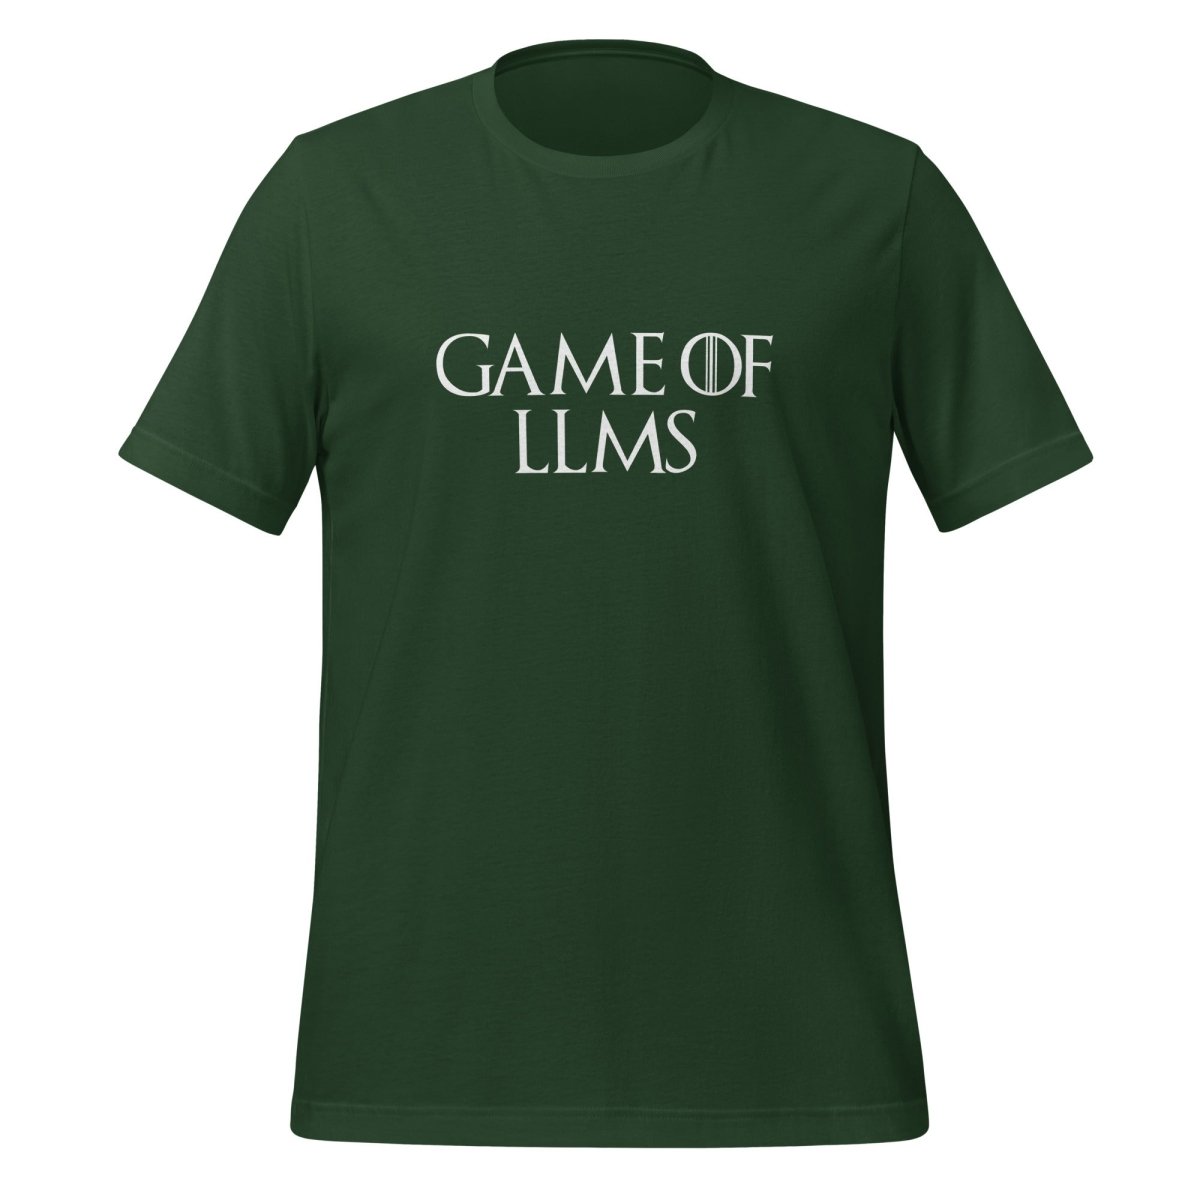 Game of LLMs T - Shirt (unisex) - Forest - AI Store